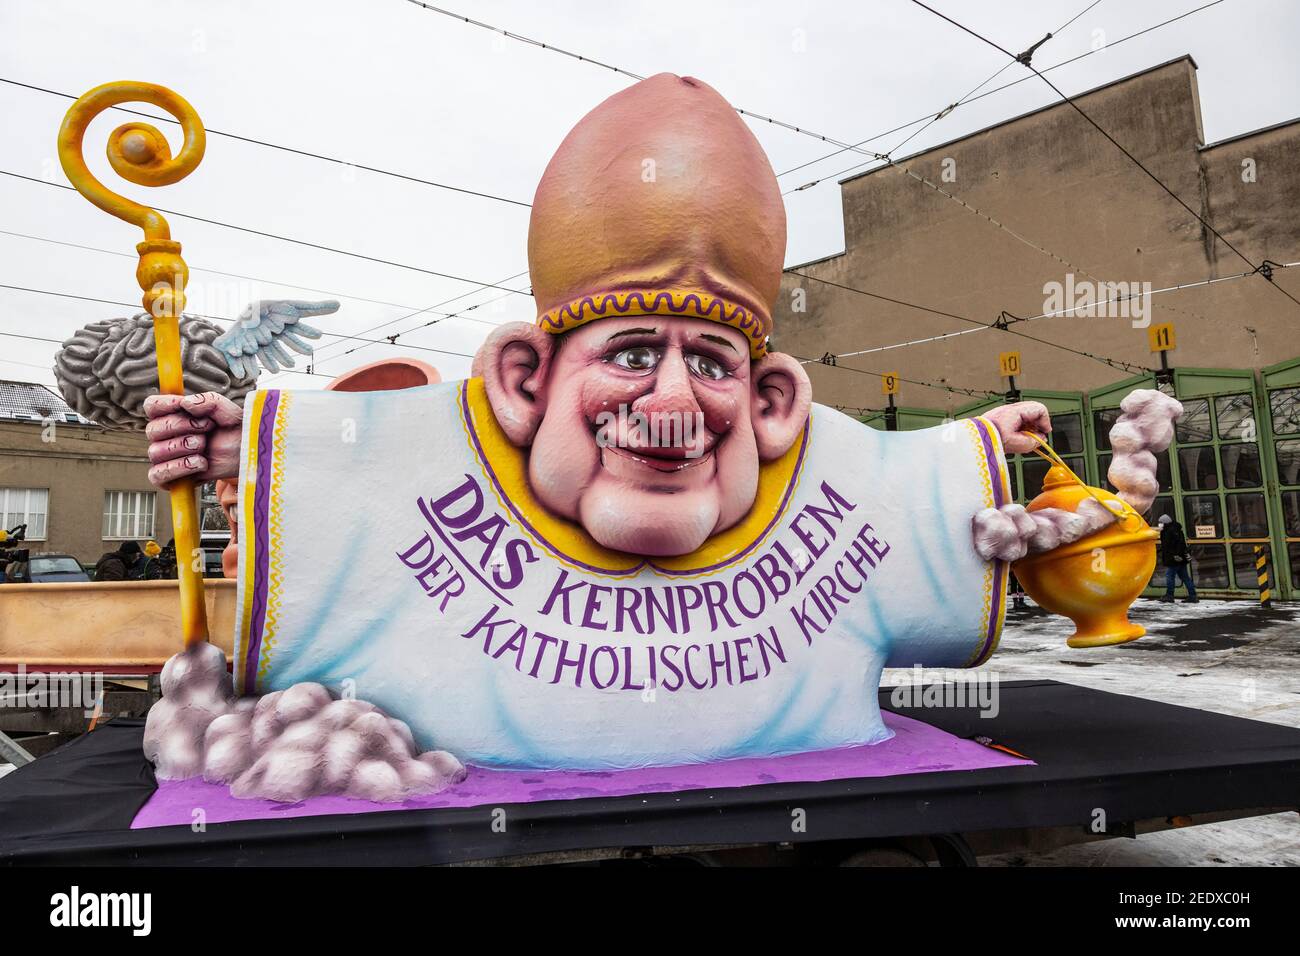 Dusseldorf, Germany. 15 February 2021. The Catholic Church. Carnival floats created by German artist Jacques Tilly were presented and later exhibited throughout Dusseldorf as the main carnival parade was cancelled due to the coronavirus pandemic. Credit: Bettina Strenske/Alamy Live News Stock Photo